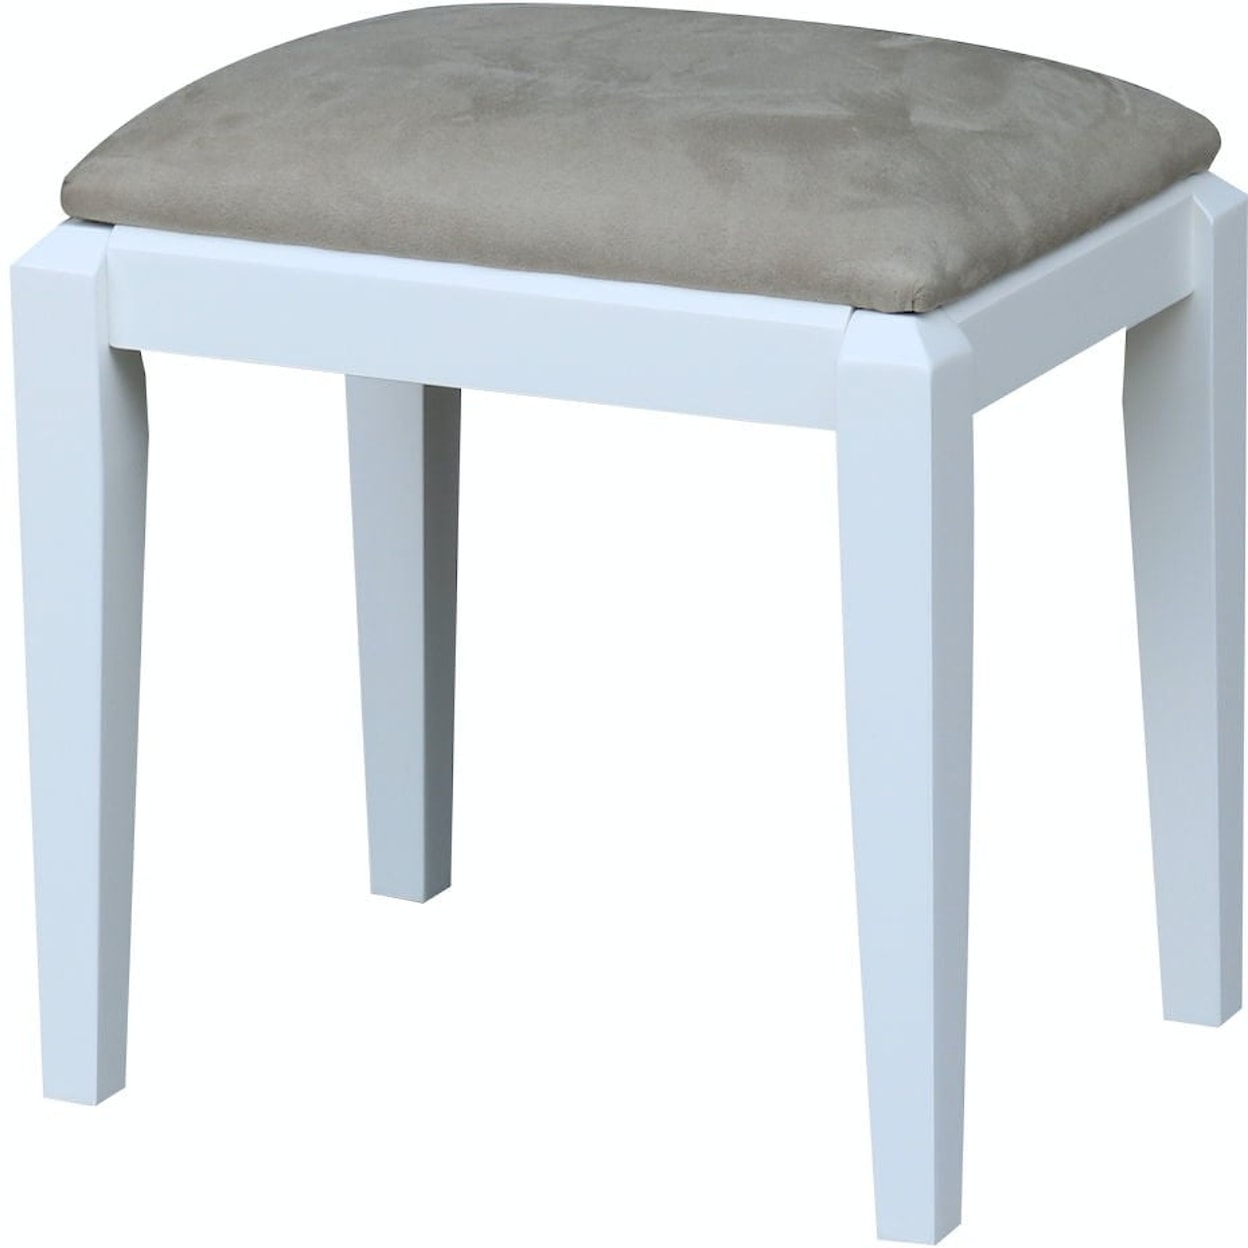 Carolina Dinette Home Accents Upholstered Vanity Bench in White